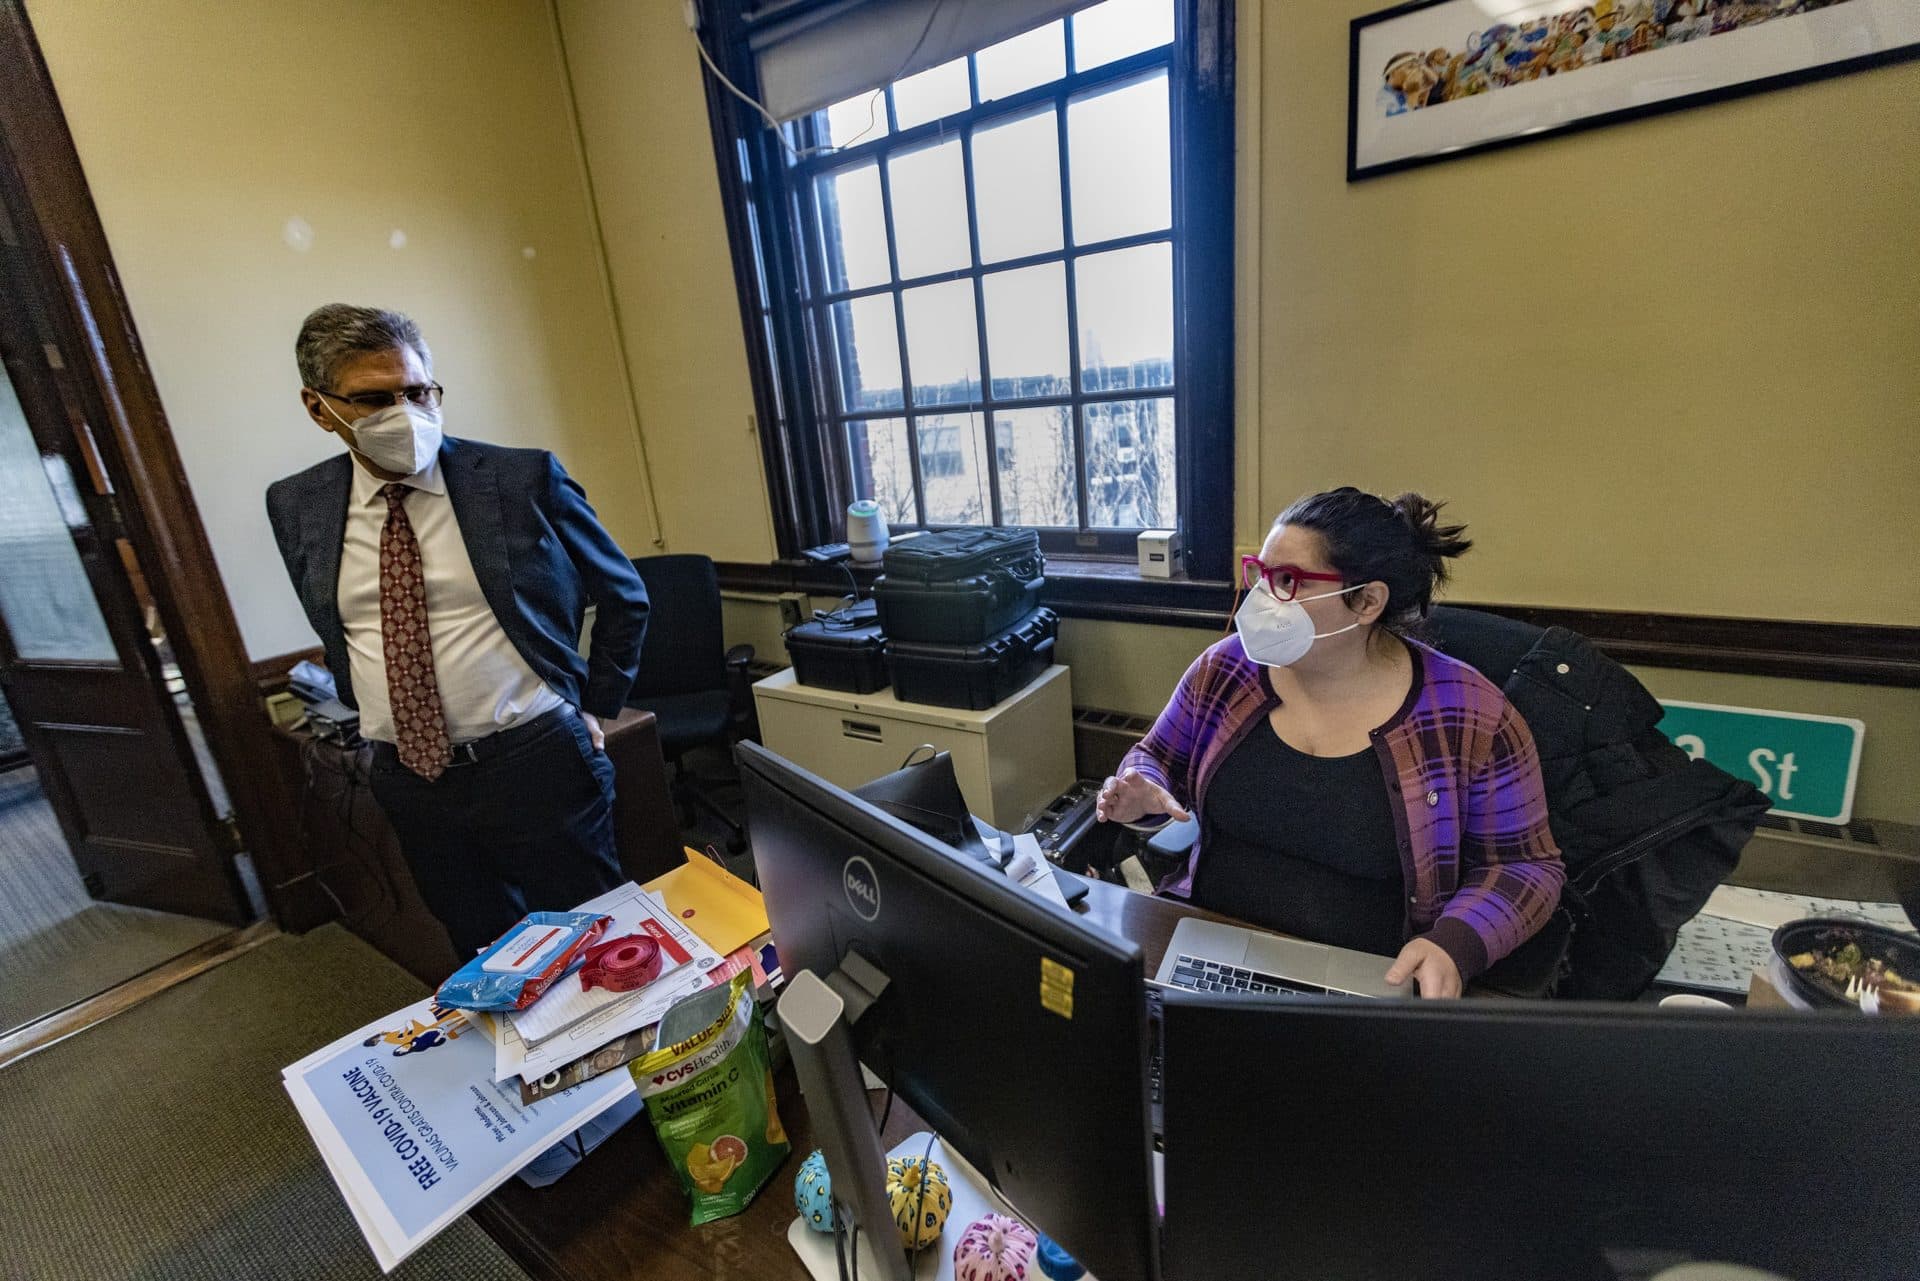 Chelsea City Manager Tom Ambrosino, left, checks in with Communication and Community Outreach Manager Lourdes Alvarez after her visit to the COVID-19 clinic at the St. Rose School. (Jesse Costa/WBUR)